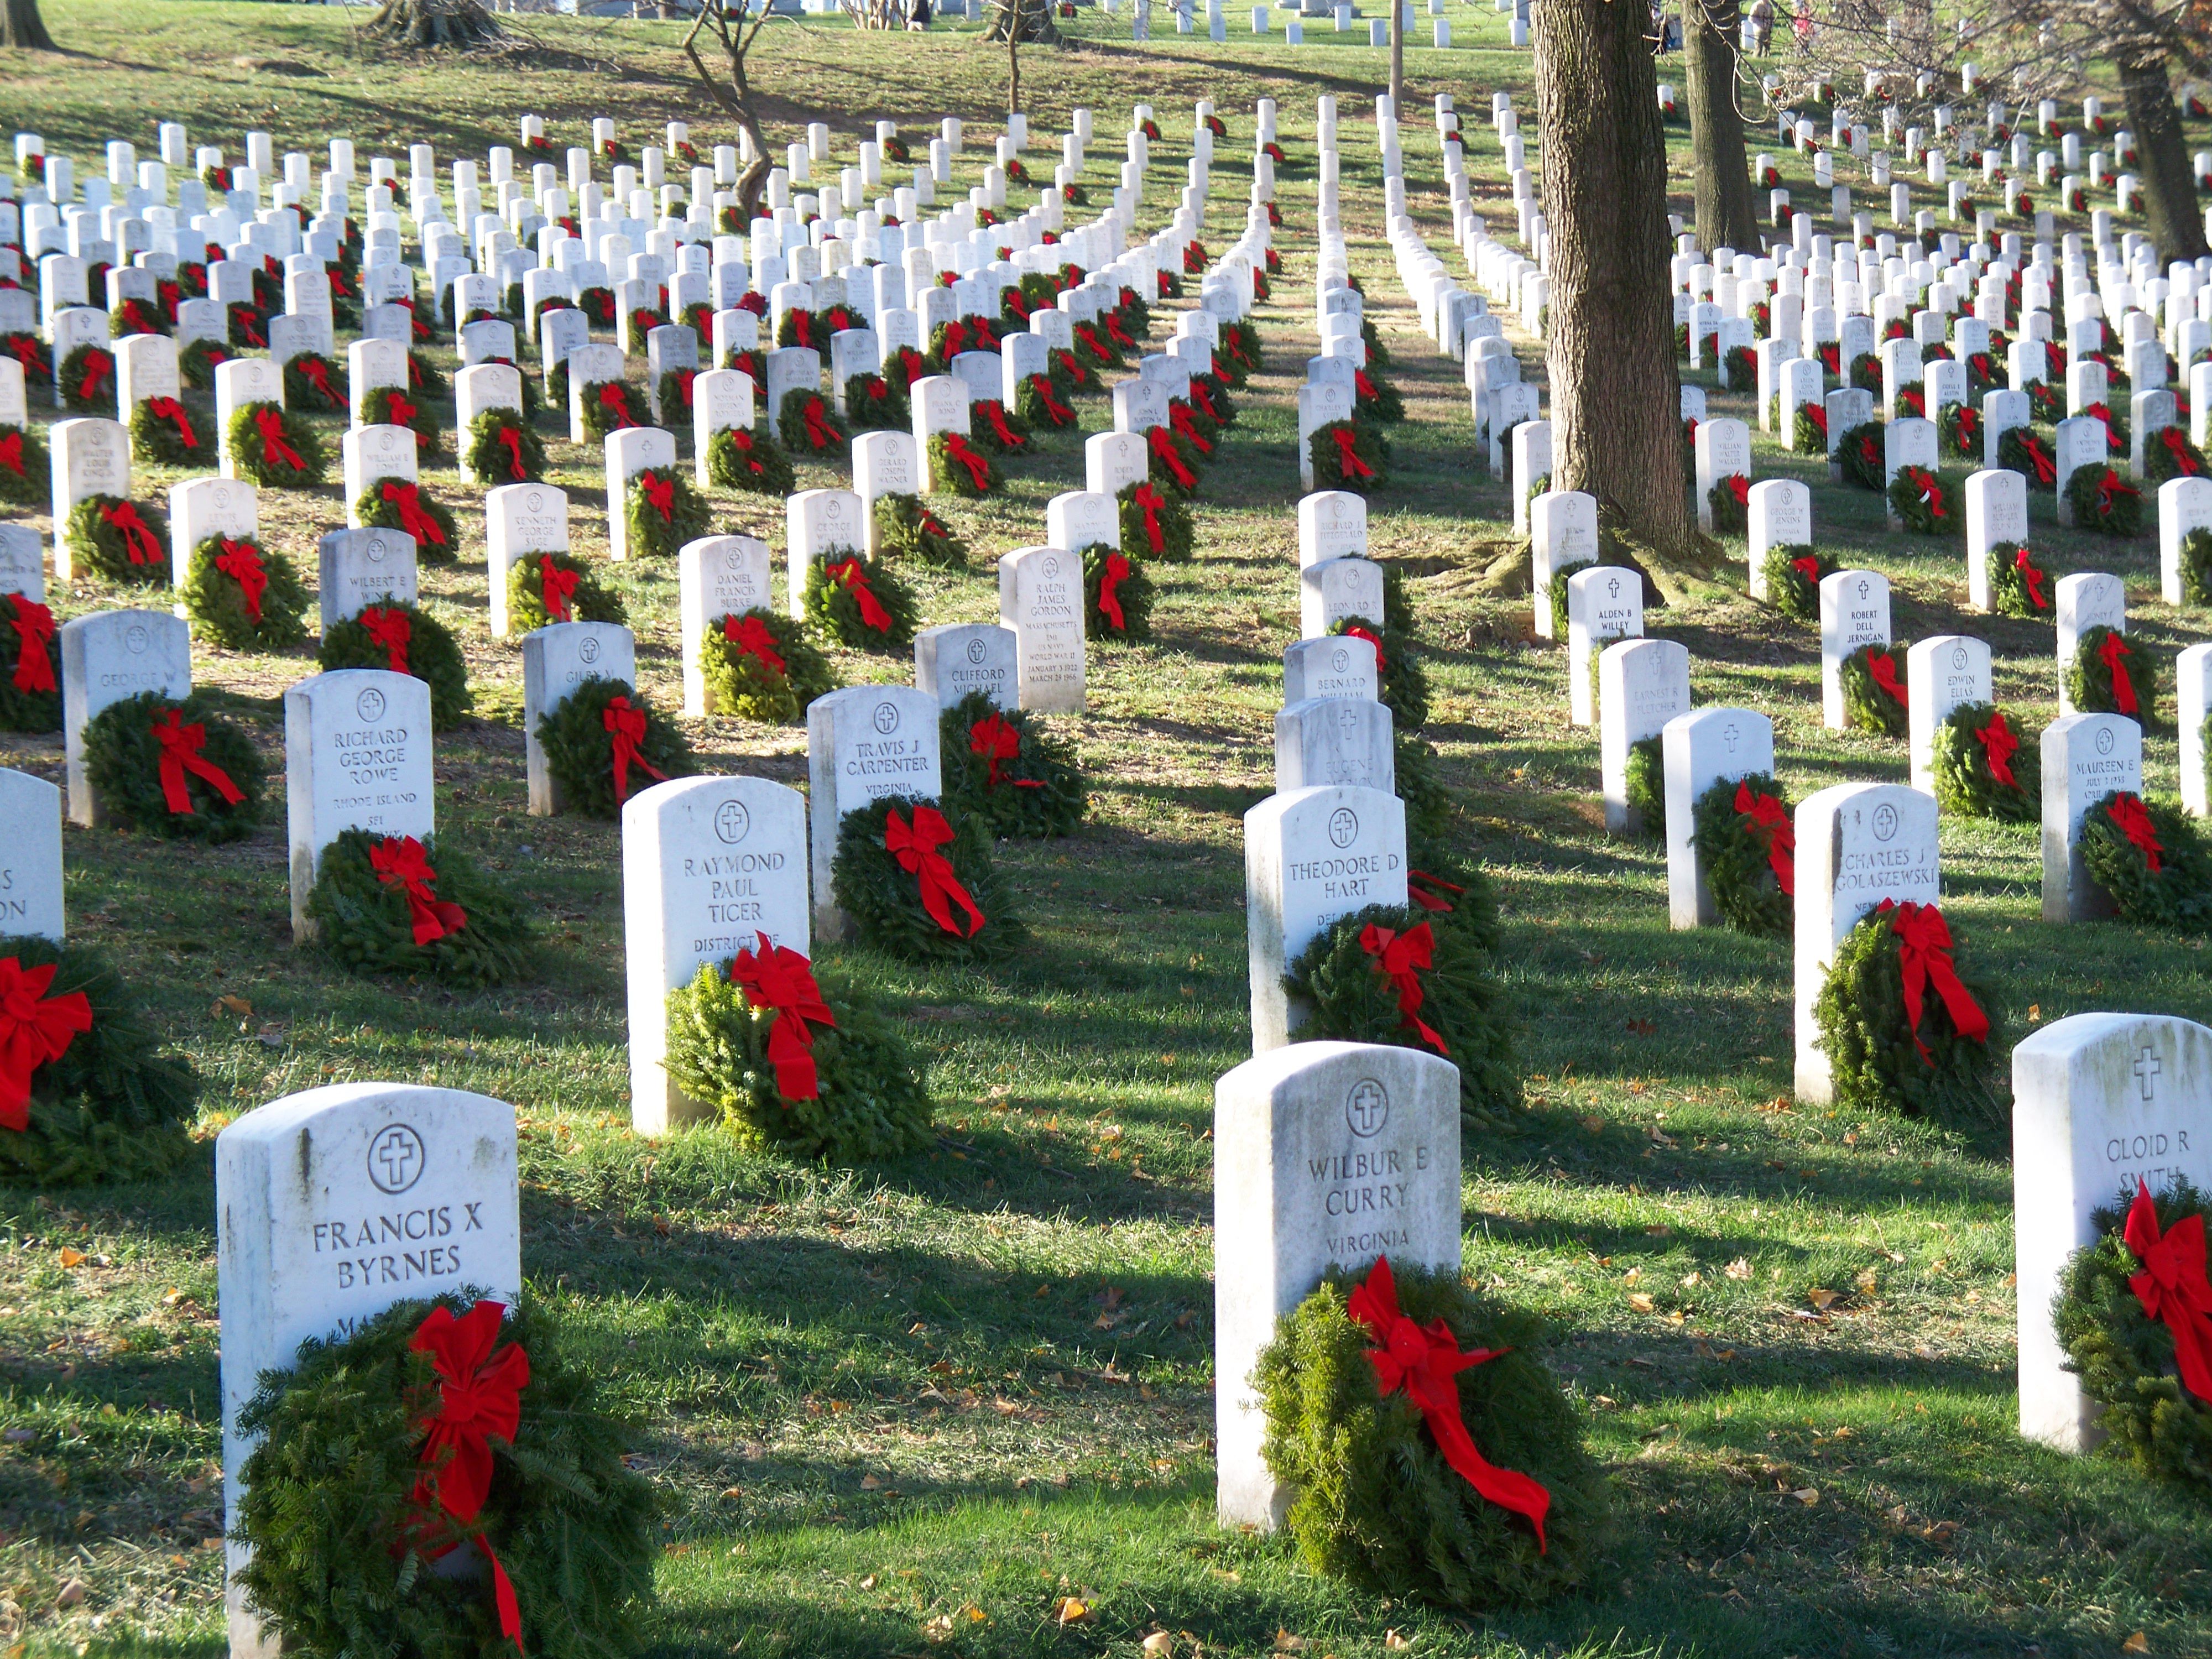 More than 7,500 holiday wreaths needed for veterans' graves